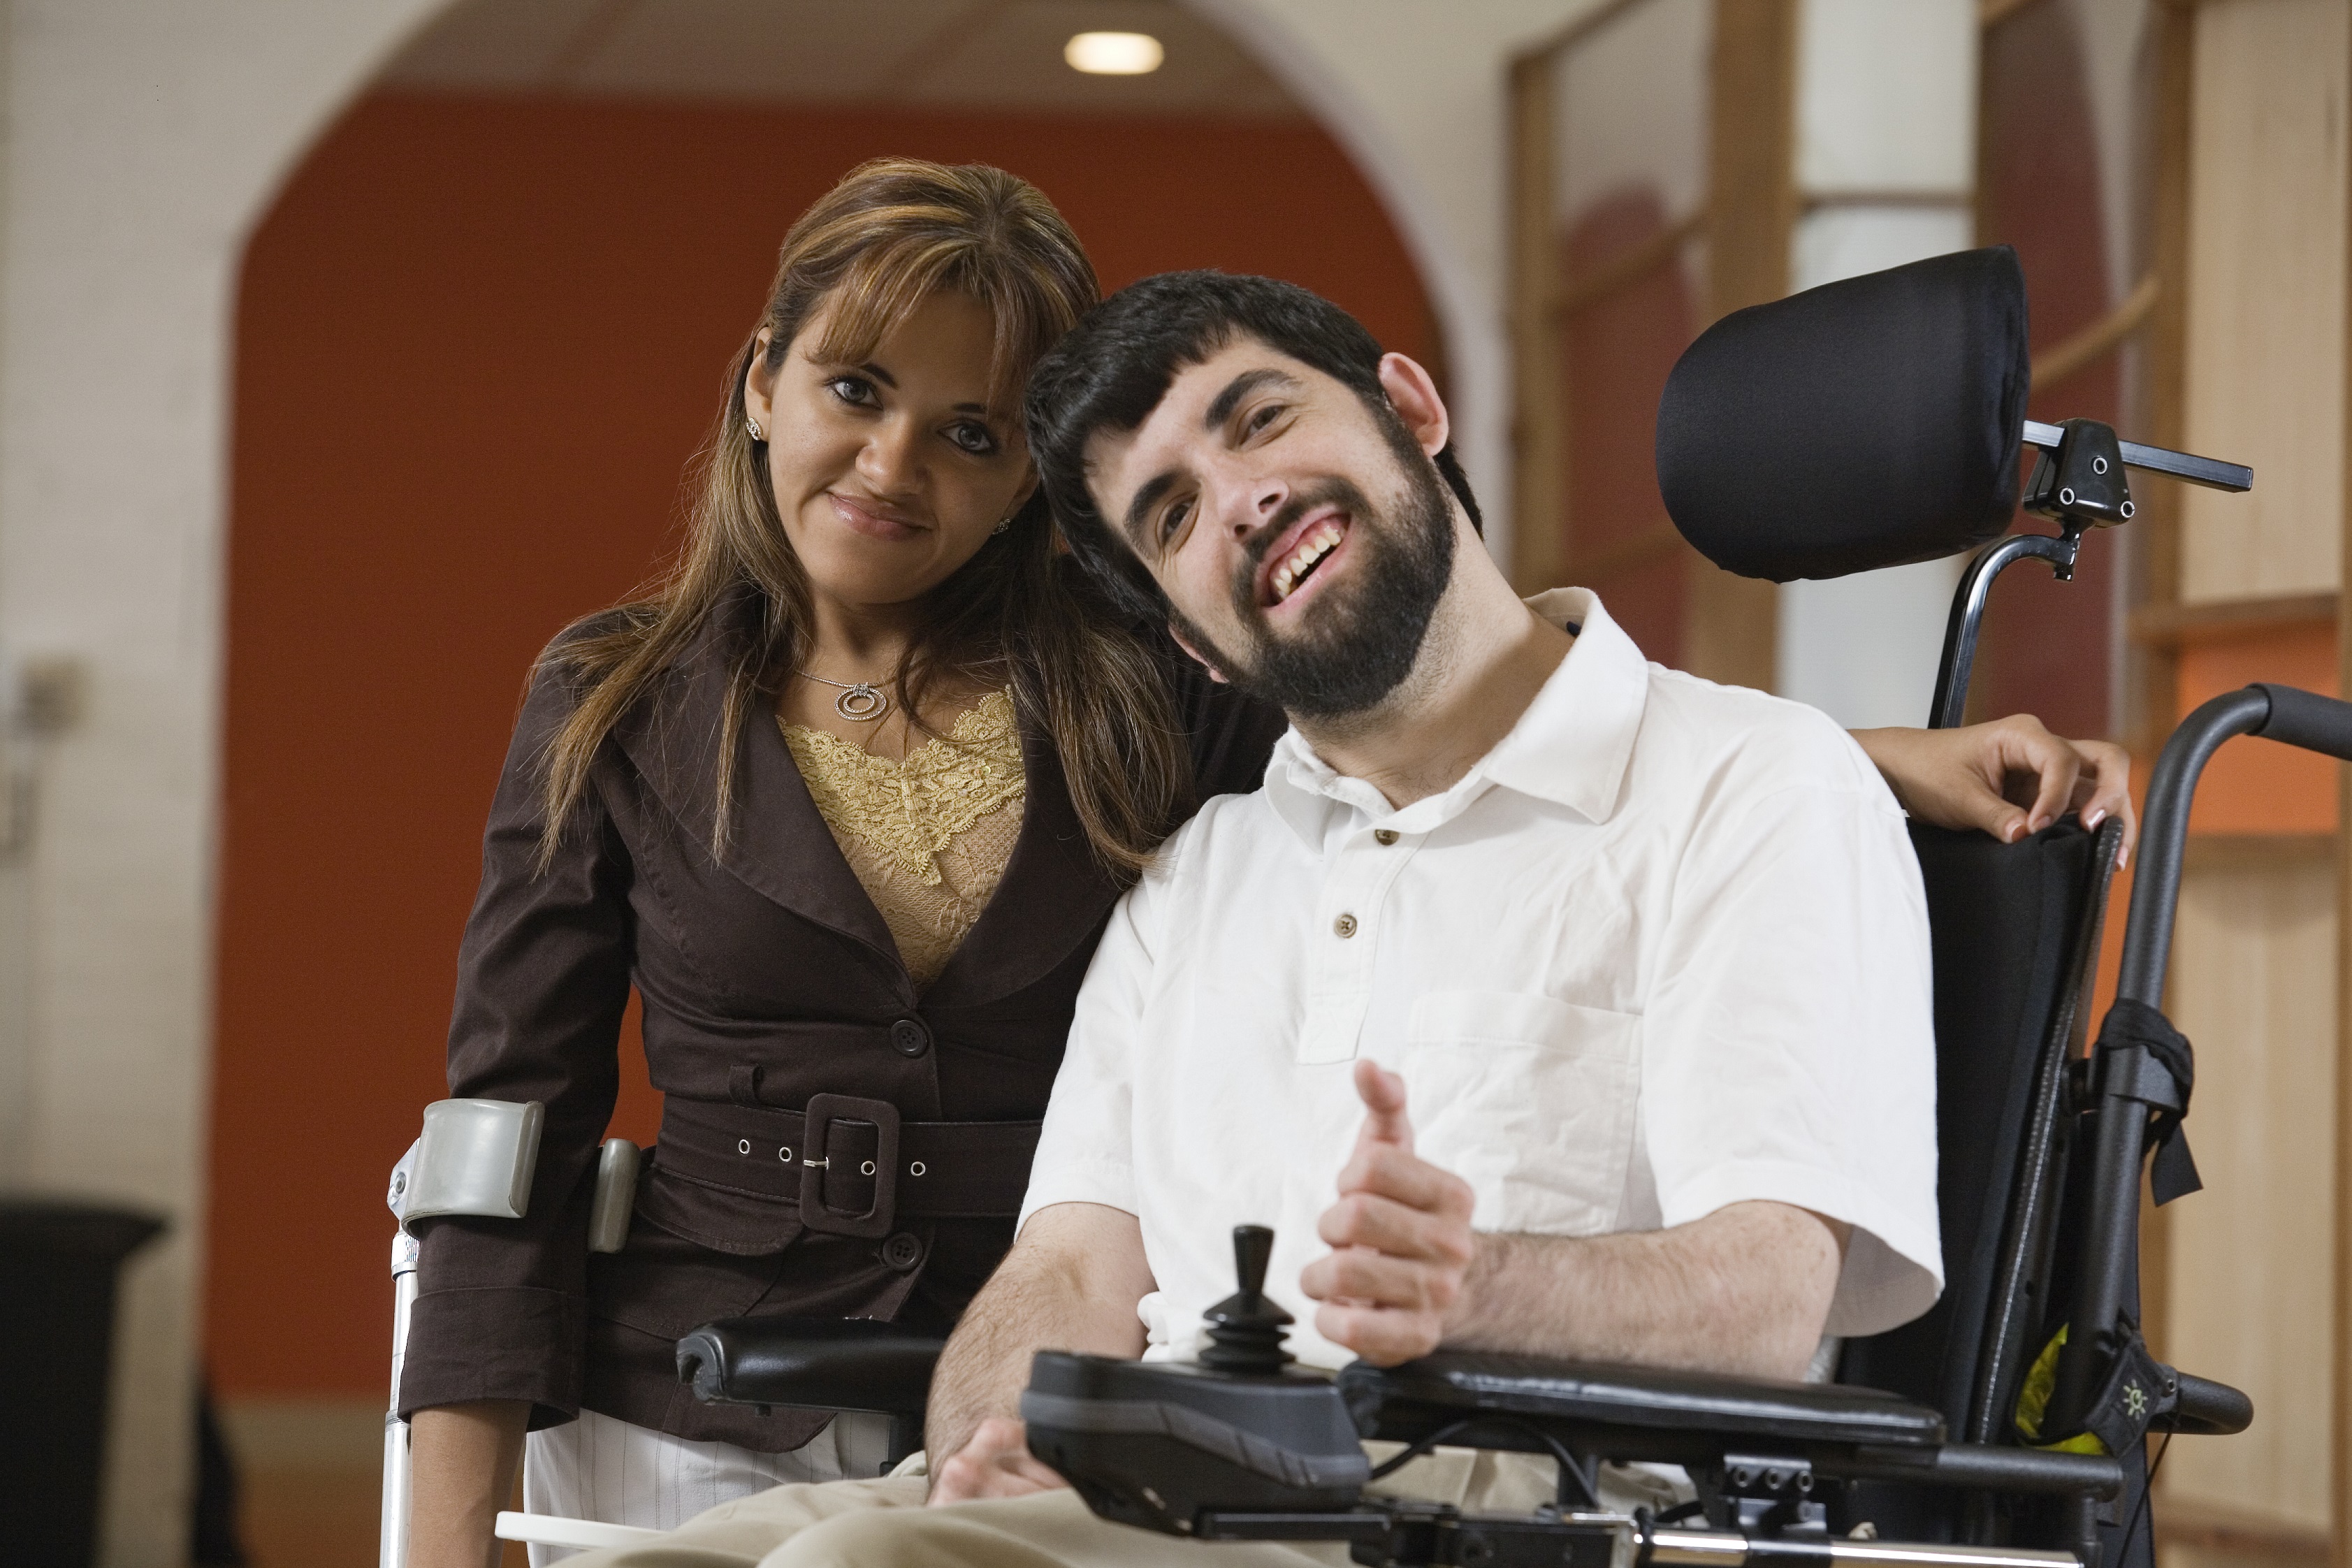 Woman using crutches standing next to man using wheelchair